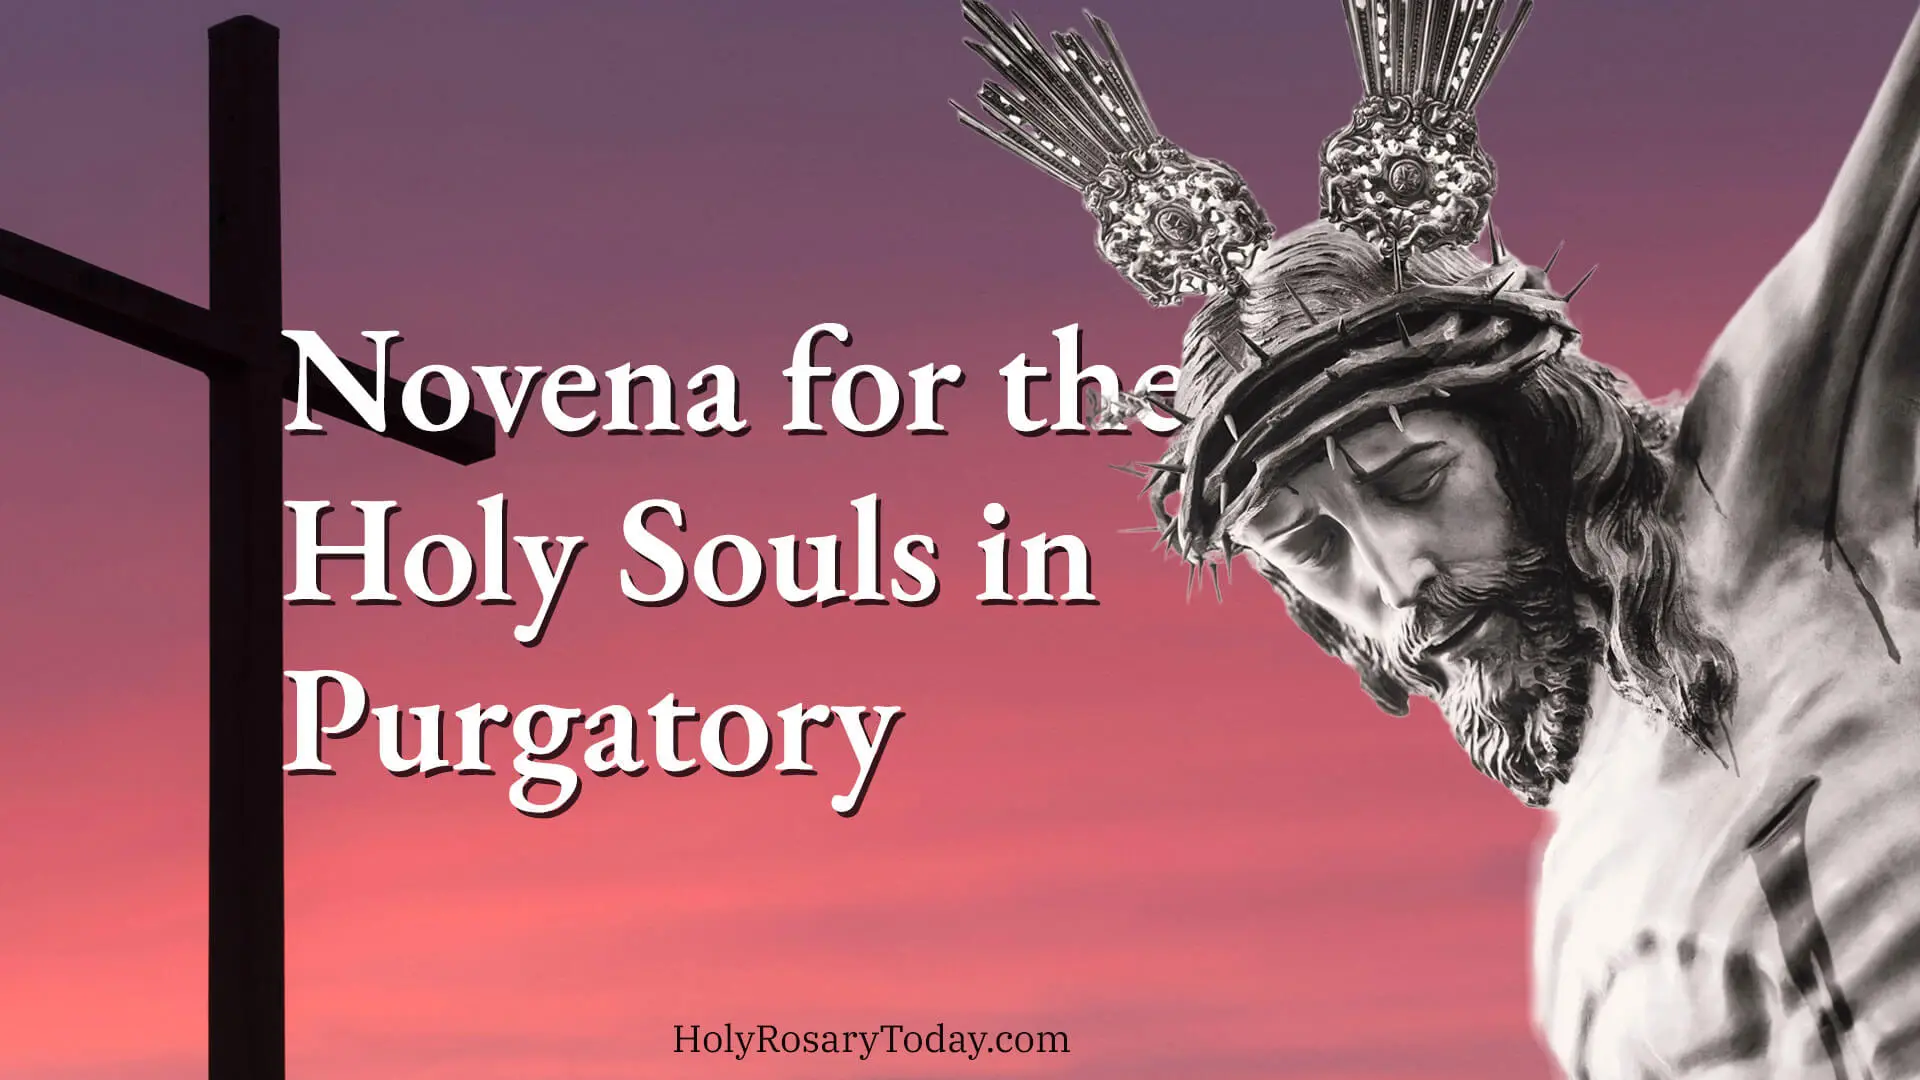 Novena for the Holy Souls in Purgatory